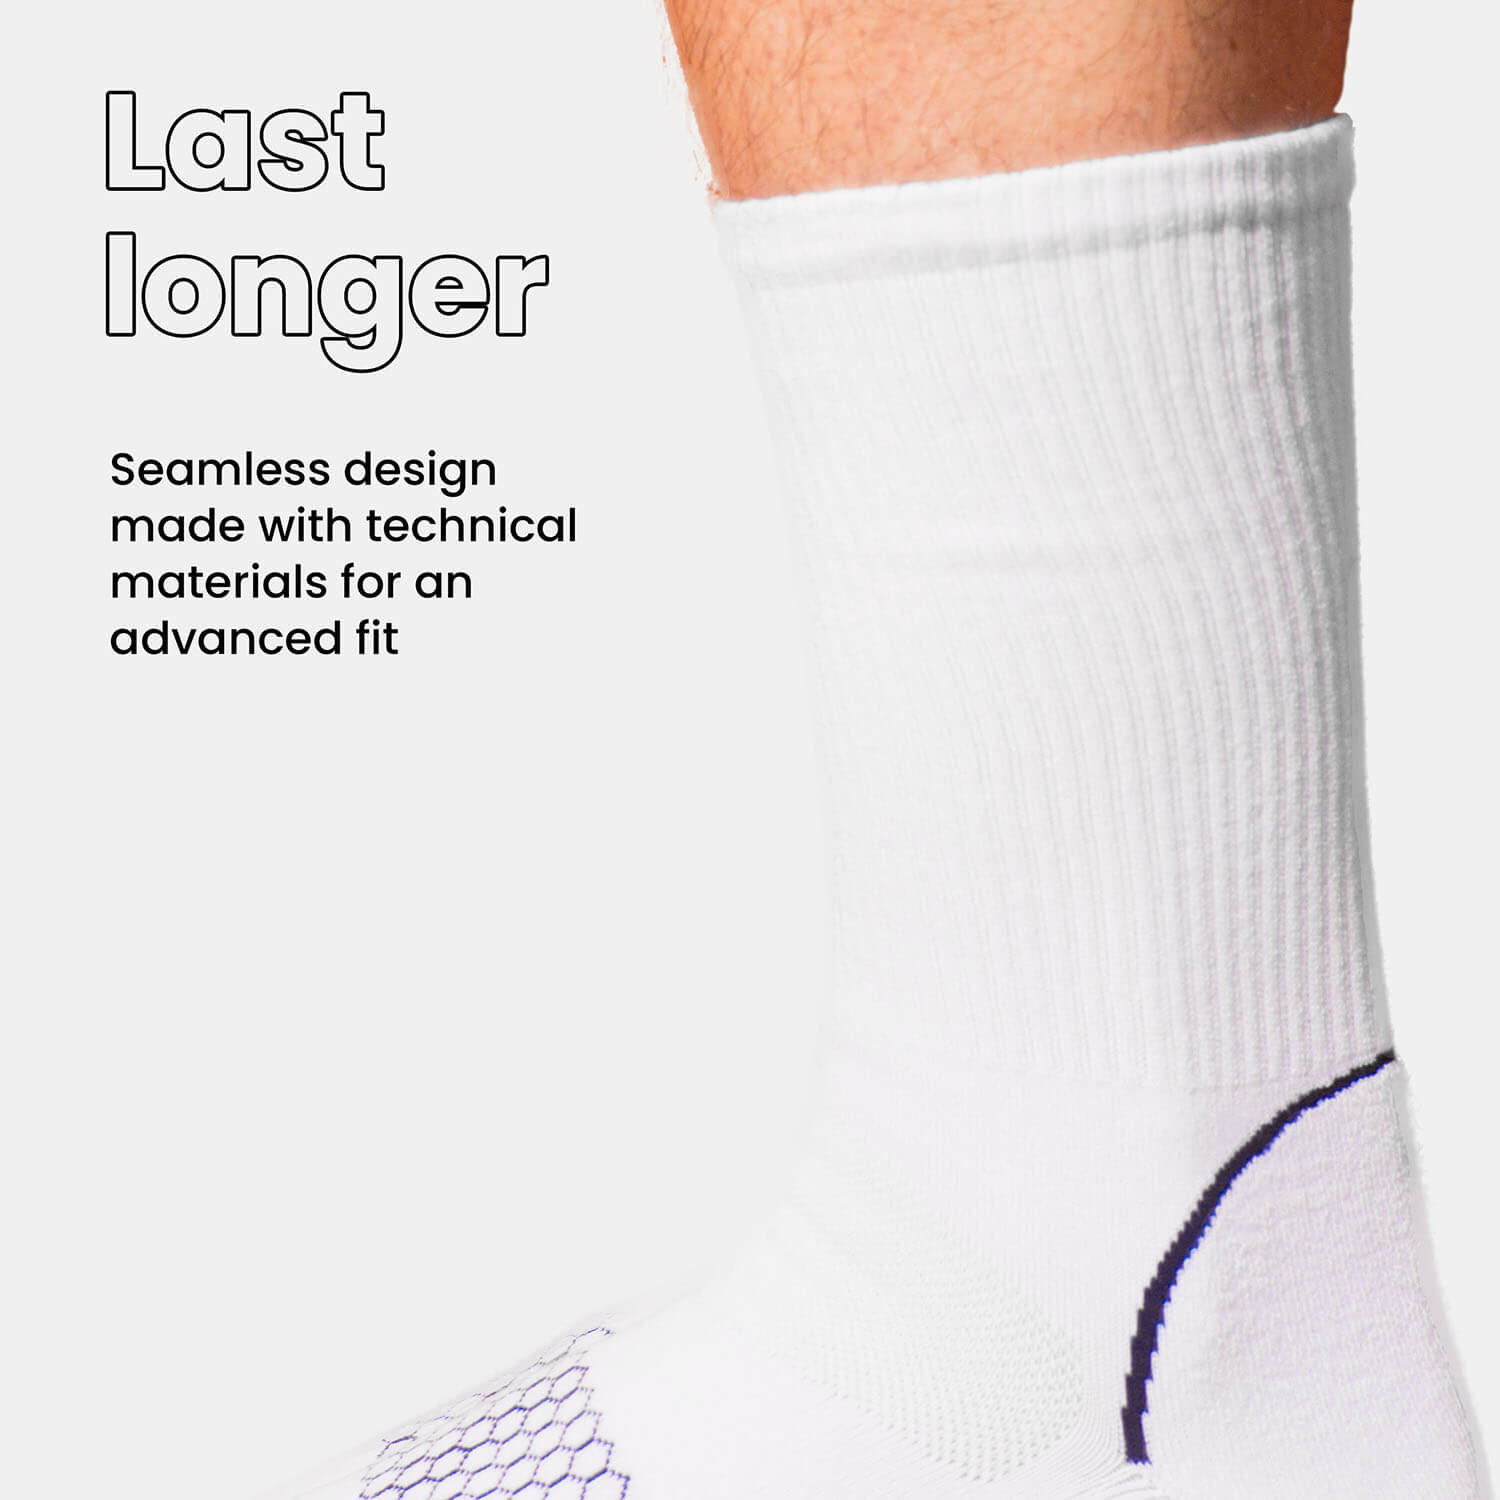 Smart Turnout Socks - (7 Pairs) Brand New with Tags!